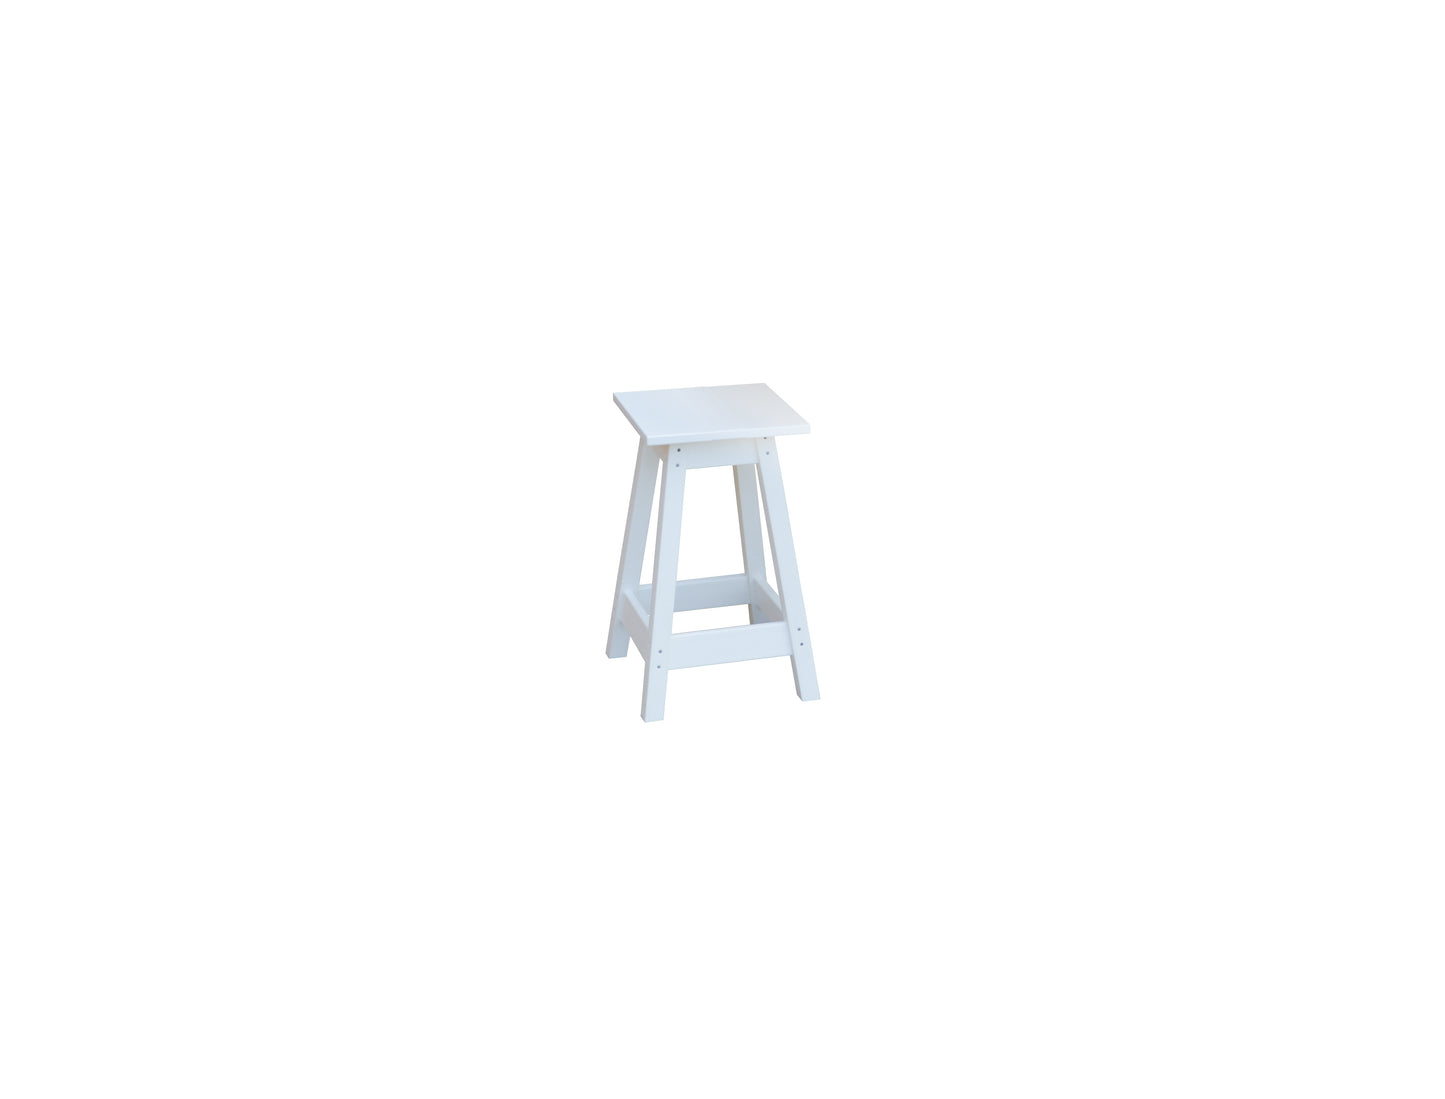 A&L Furniture Co. Recycled Plastic Square Bistro Stool - LEAD TIME TO SHIP 10 BUSINESS DAYS